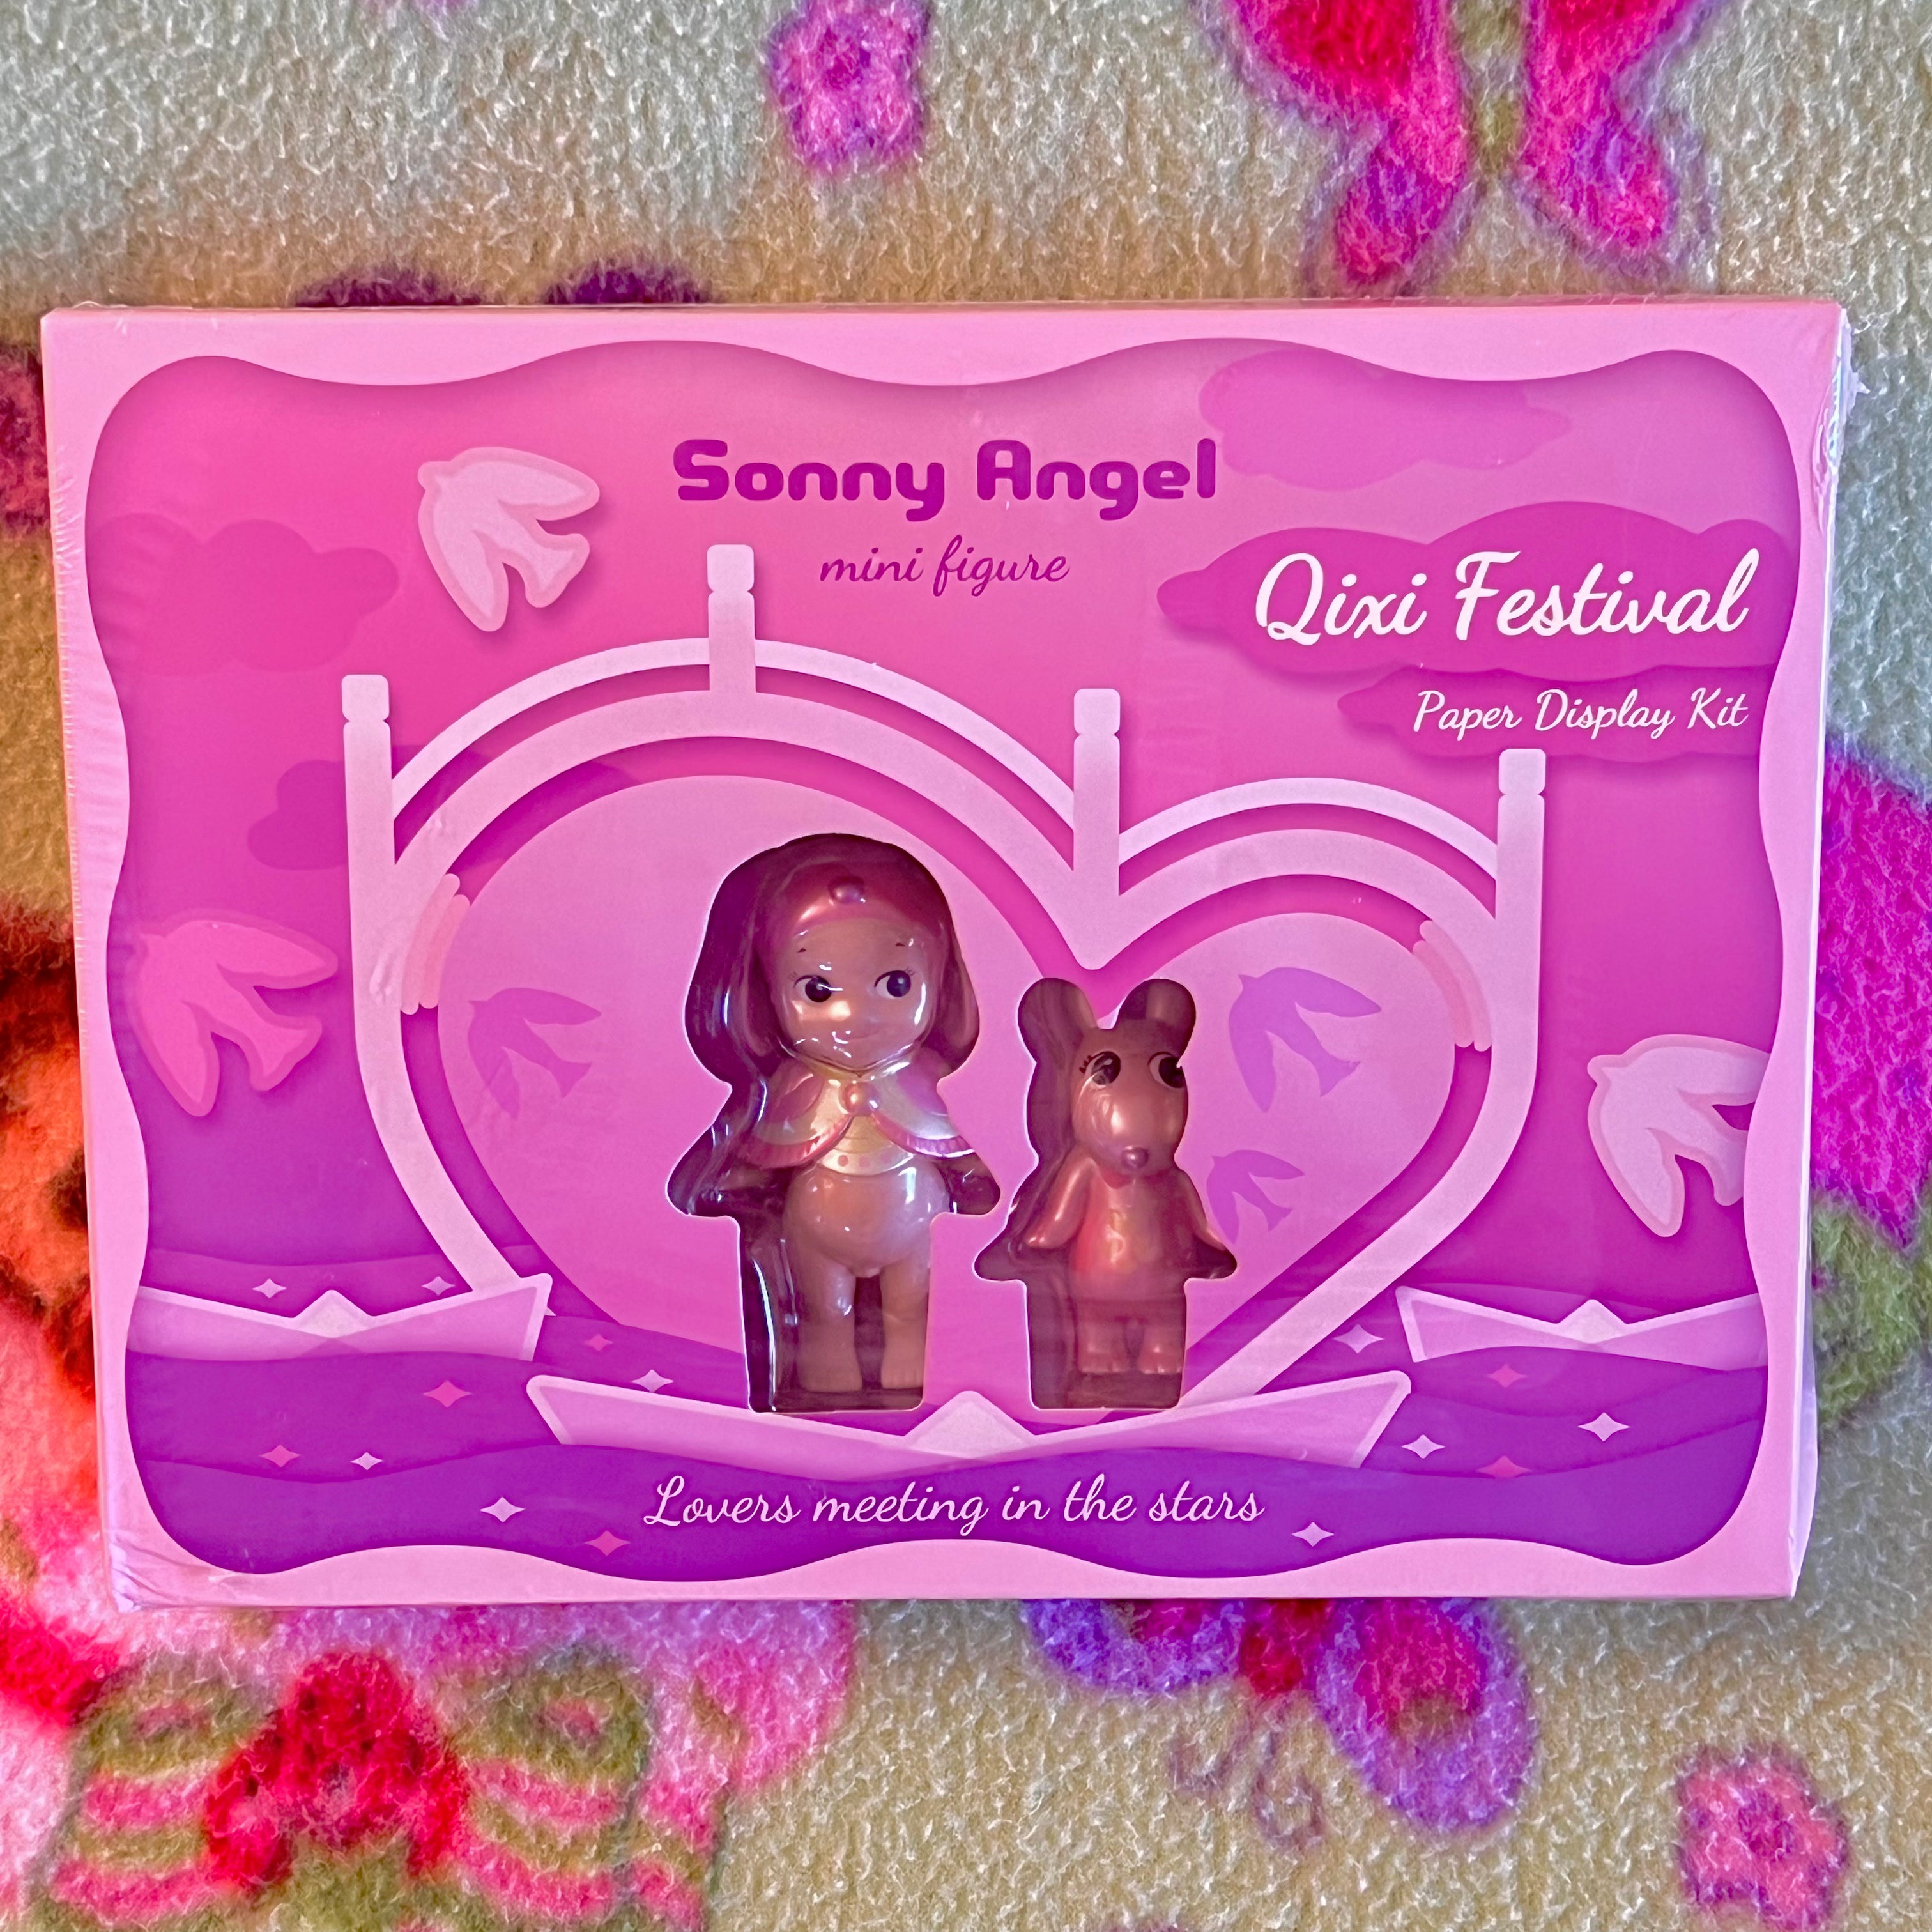 Sonny Angel Qixi Festival Paper Display Kit Bunny and Robby